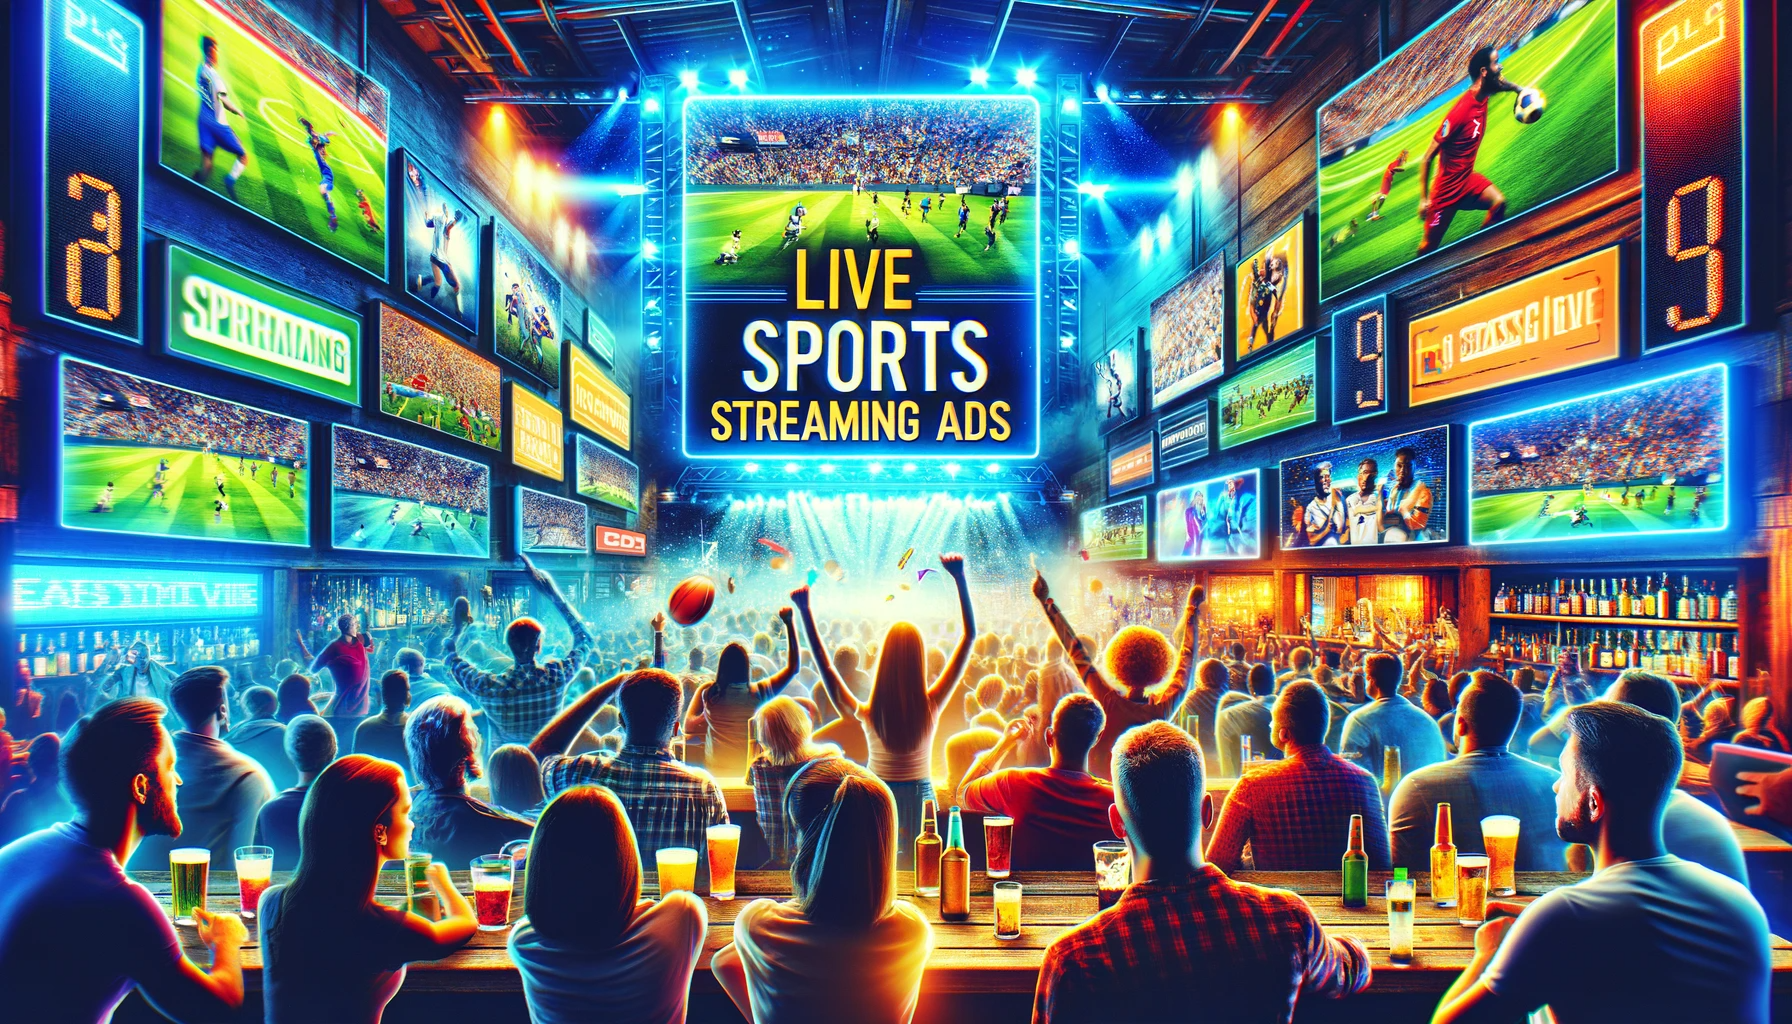 Announcing Live Sports Streaming Ads